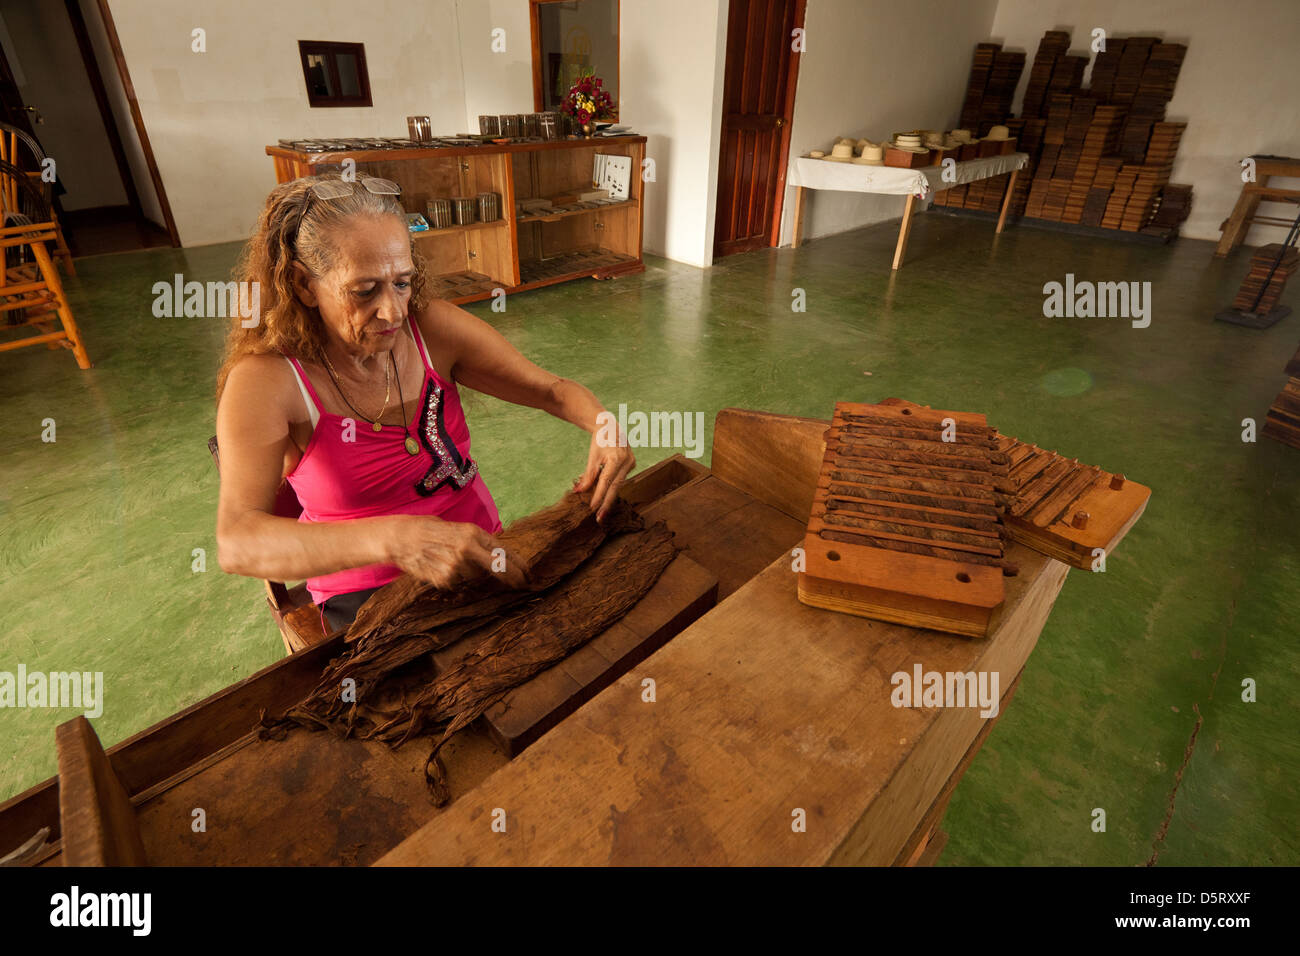 The owner of Joyas de Panama cigar factory, Miriam Padilla, with new tobacco leaves ready for cigar production, Republic of Panama, Central America. Stock Photo